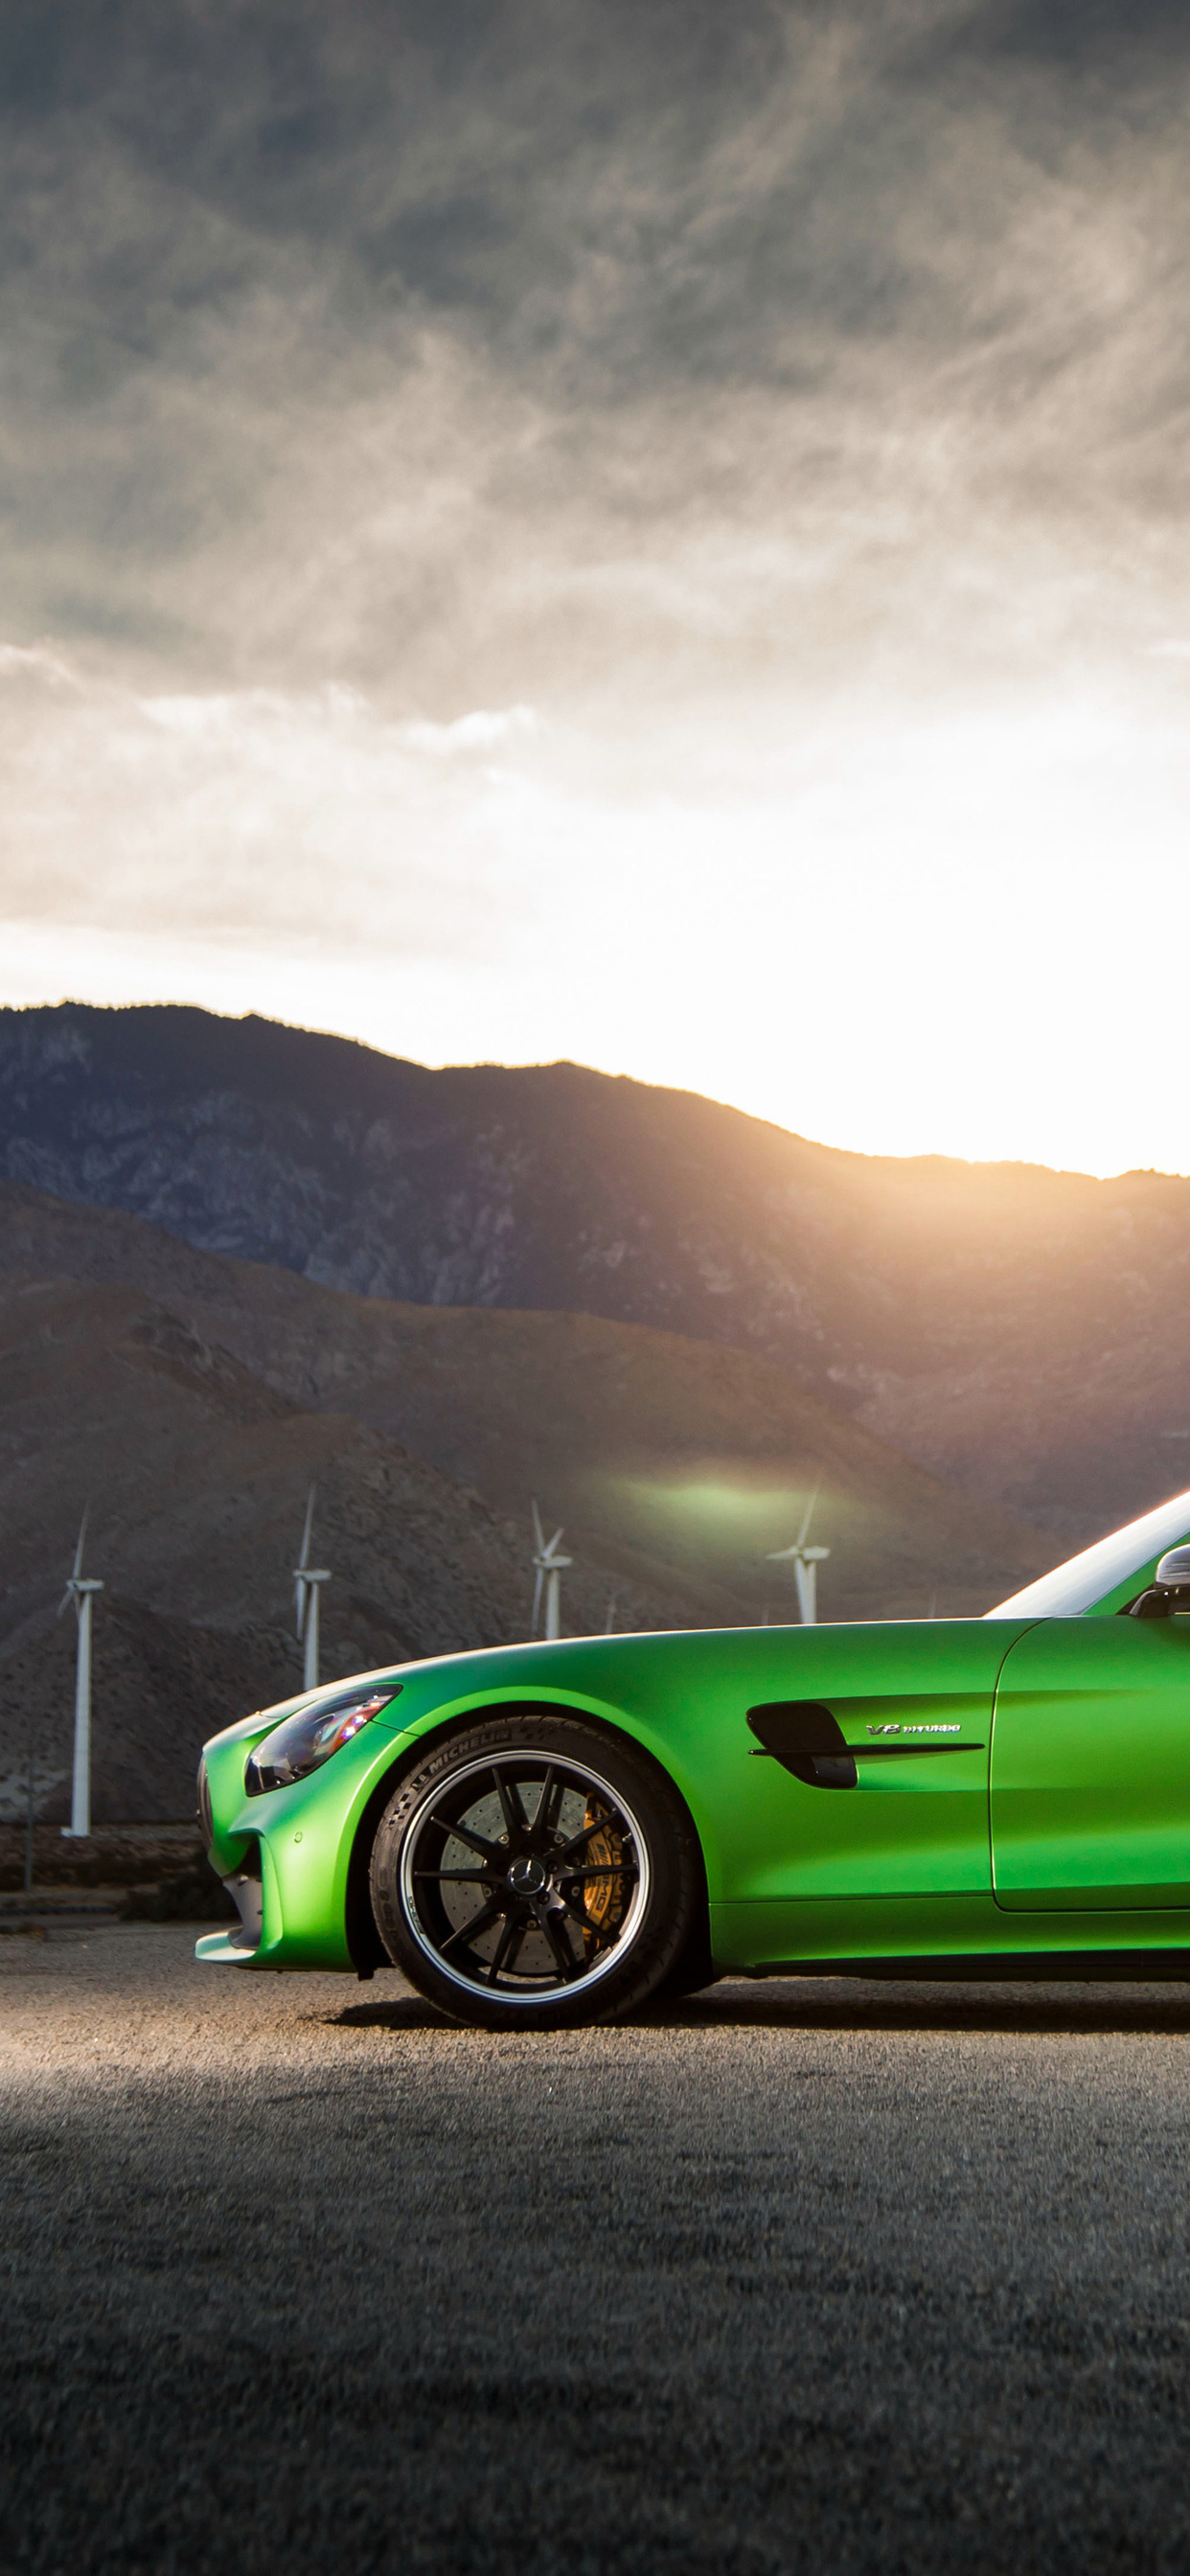 Iphone Xs Max Amg Gt R Wallpaper Phone Reviews News Opinions About Phone